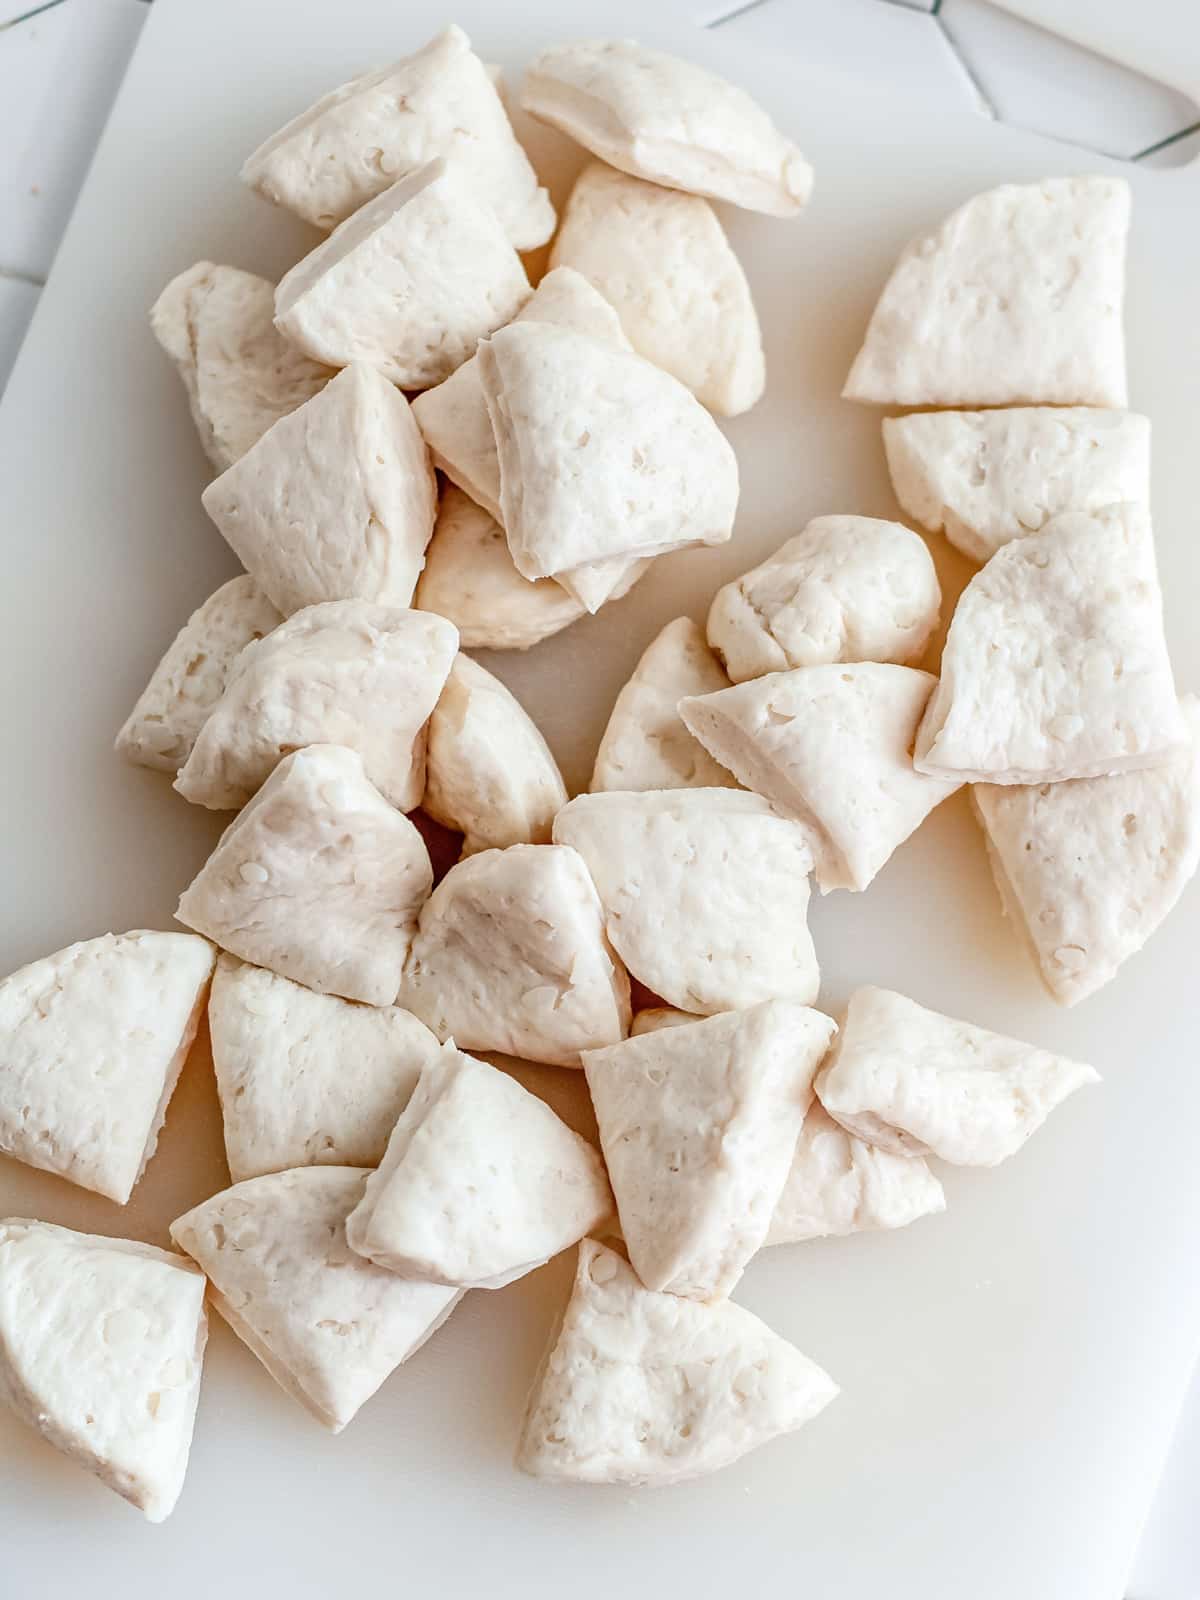 Biscuits chopped into quarter size pieces.